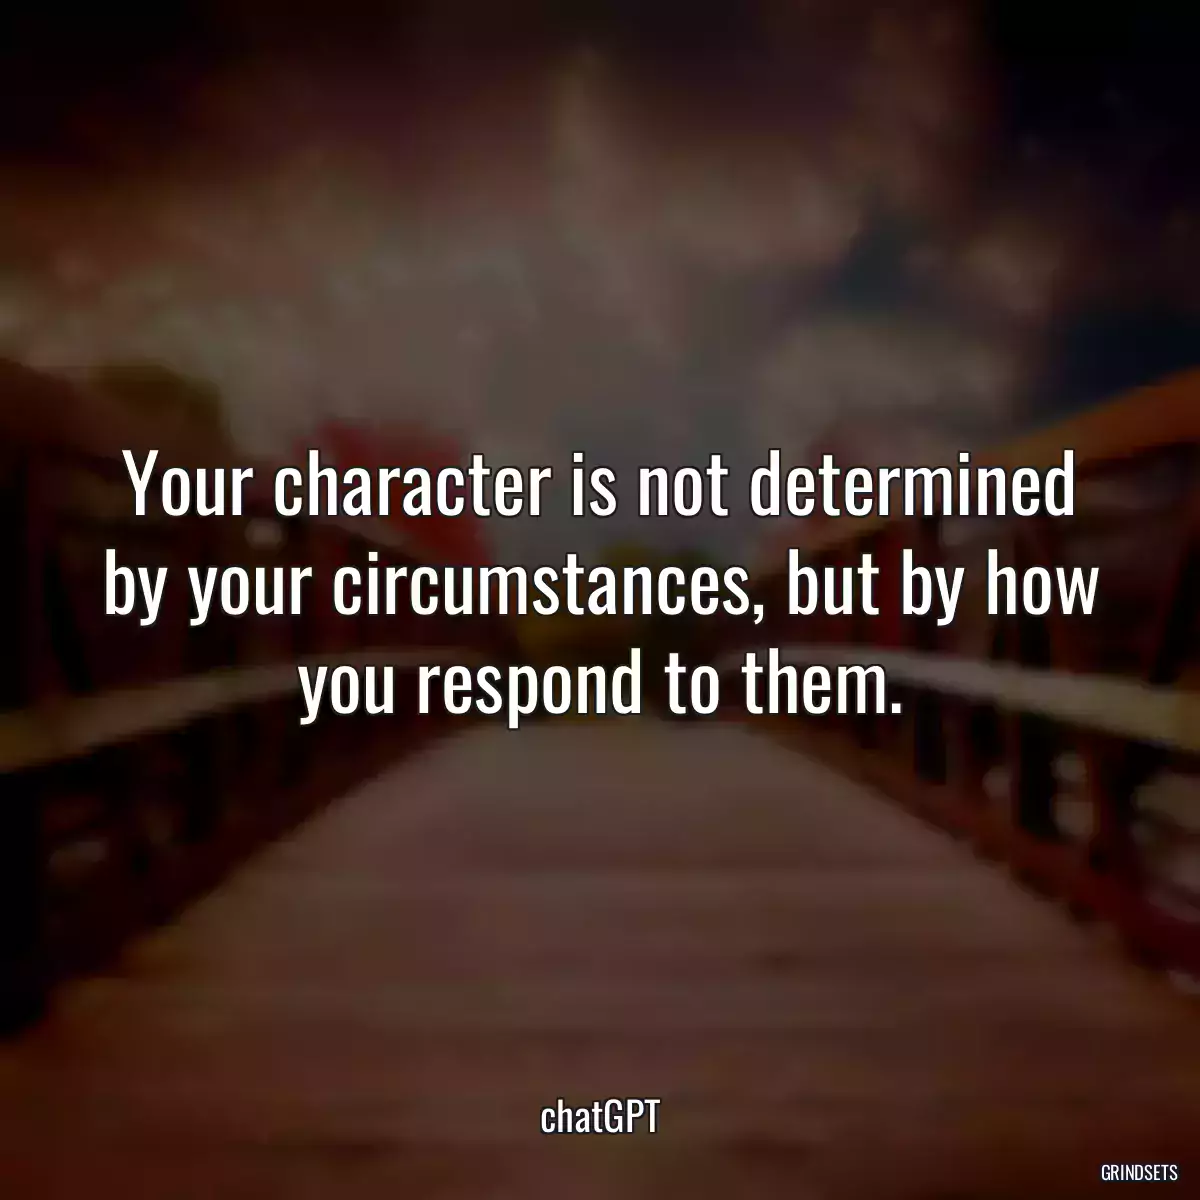 Your character is not determined by your circumstances, but by how you respond to them.